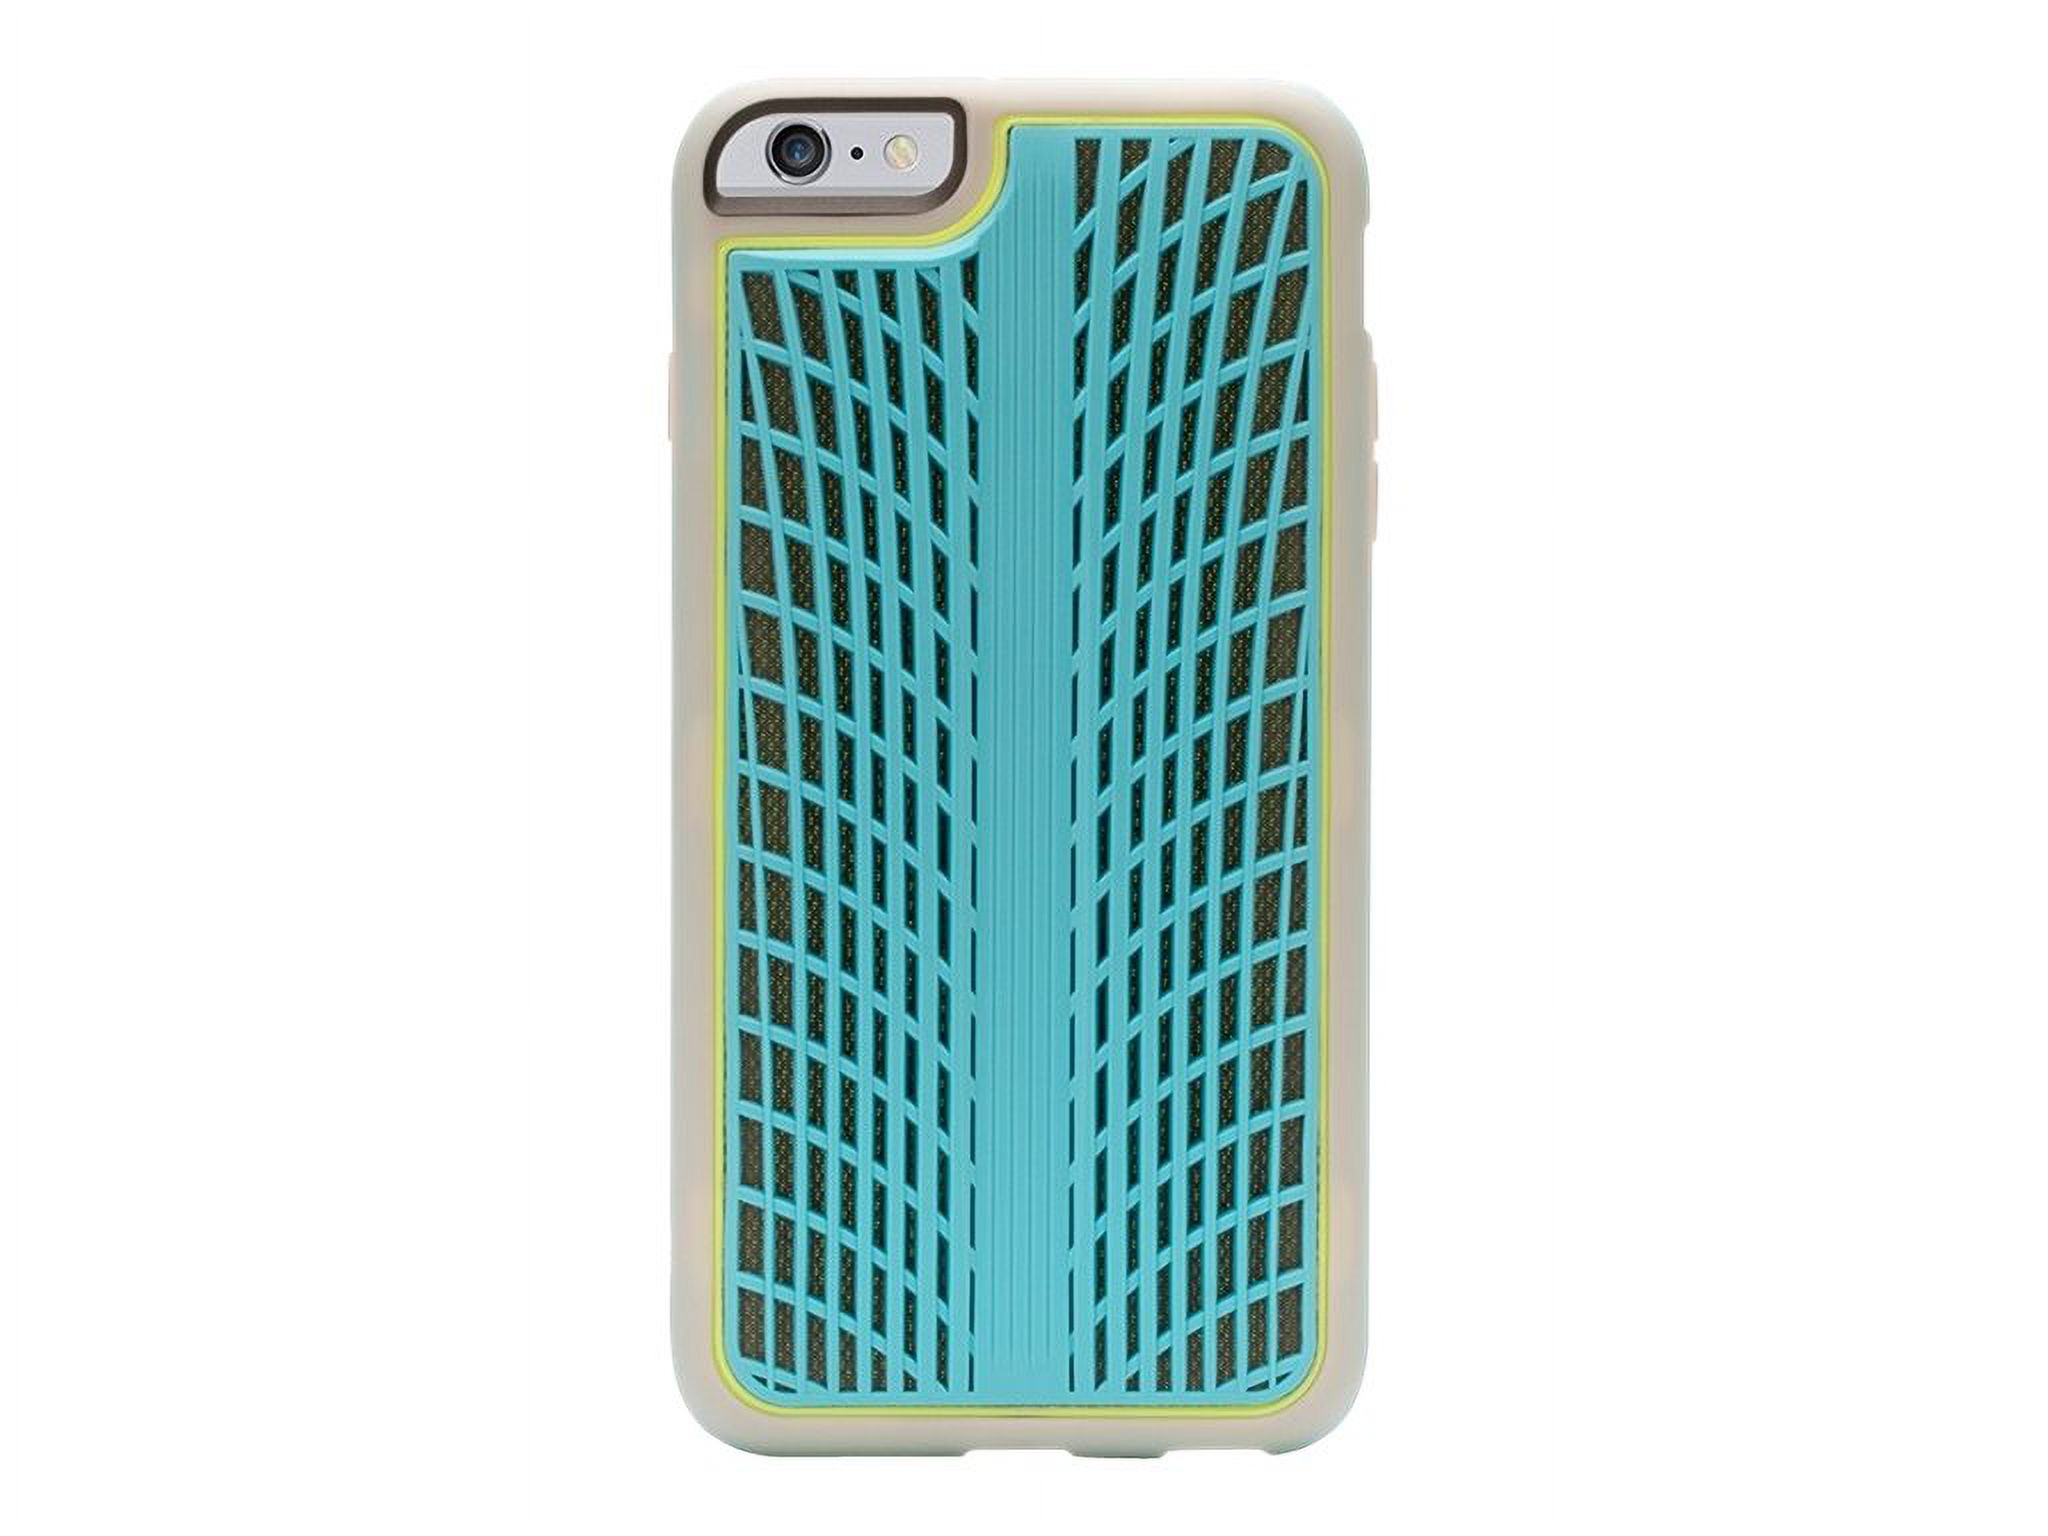 Griffin Identity Ultra Slim Case for Apple iPhone 6 6s Plus 5.5 inch - Turquoise - image 1 of 2